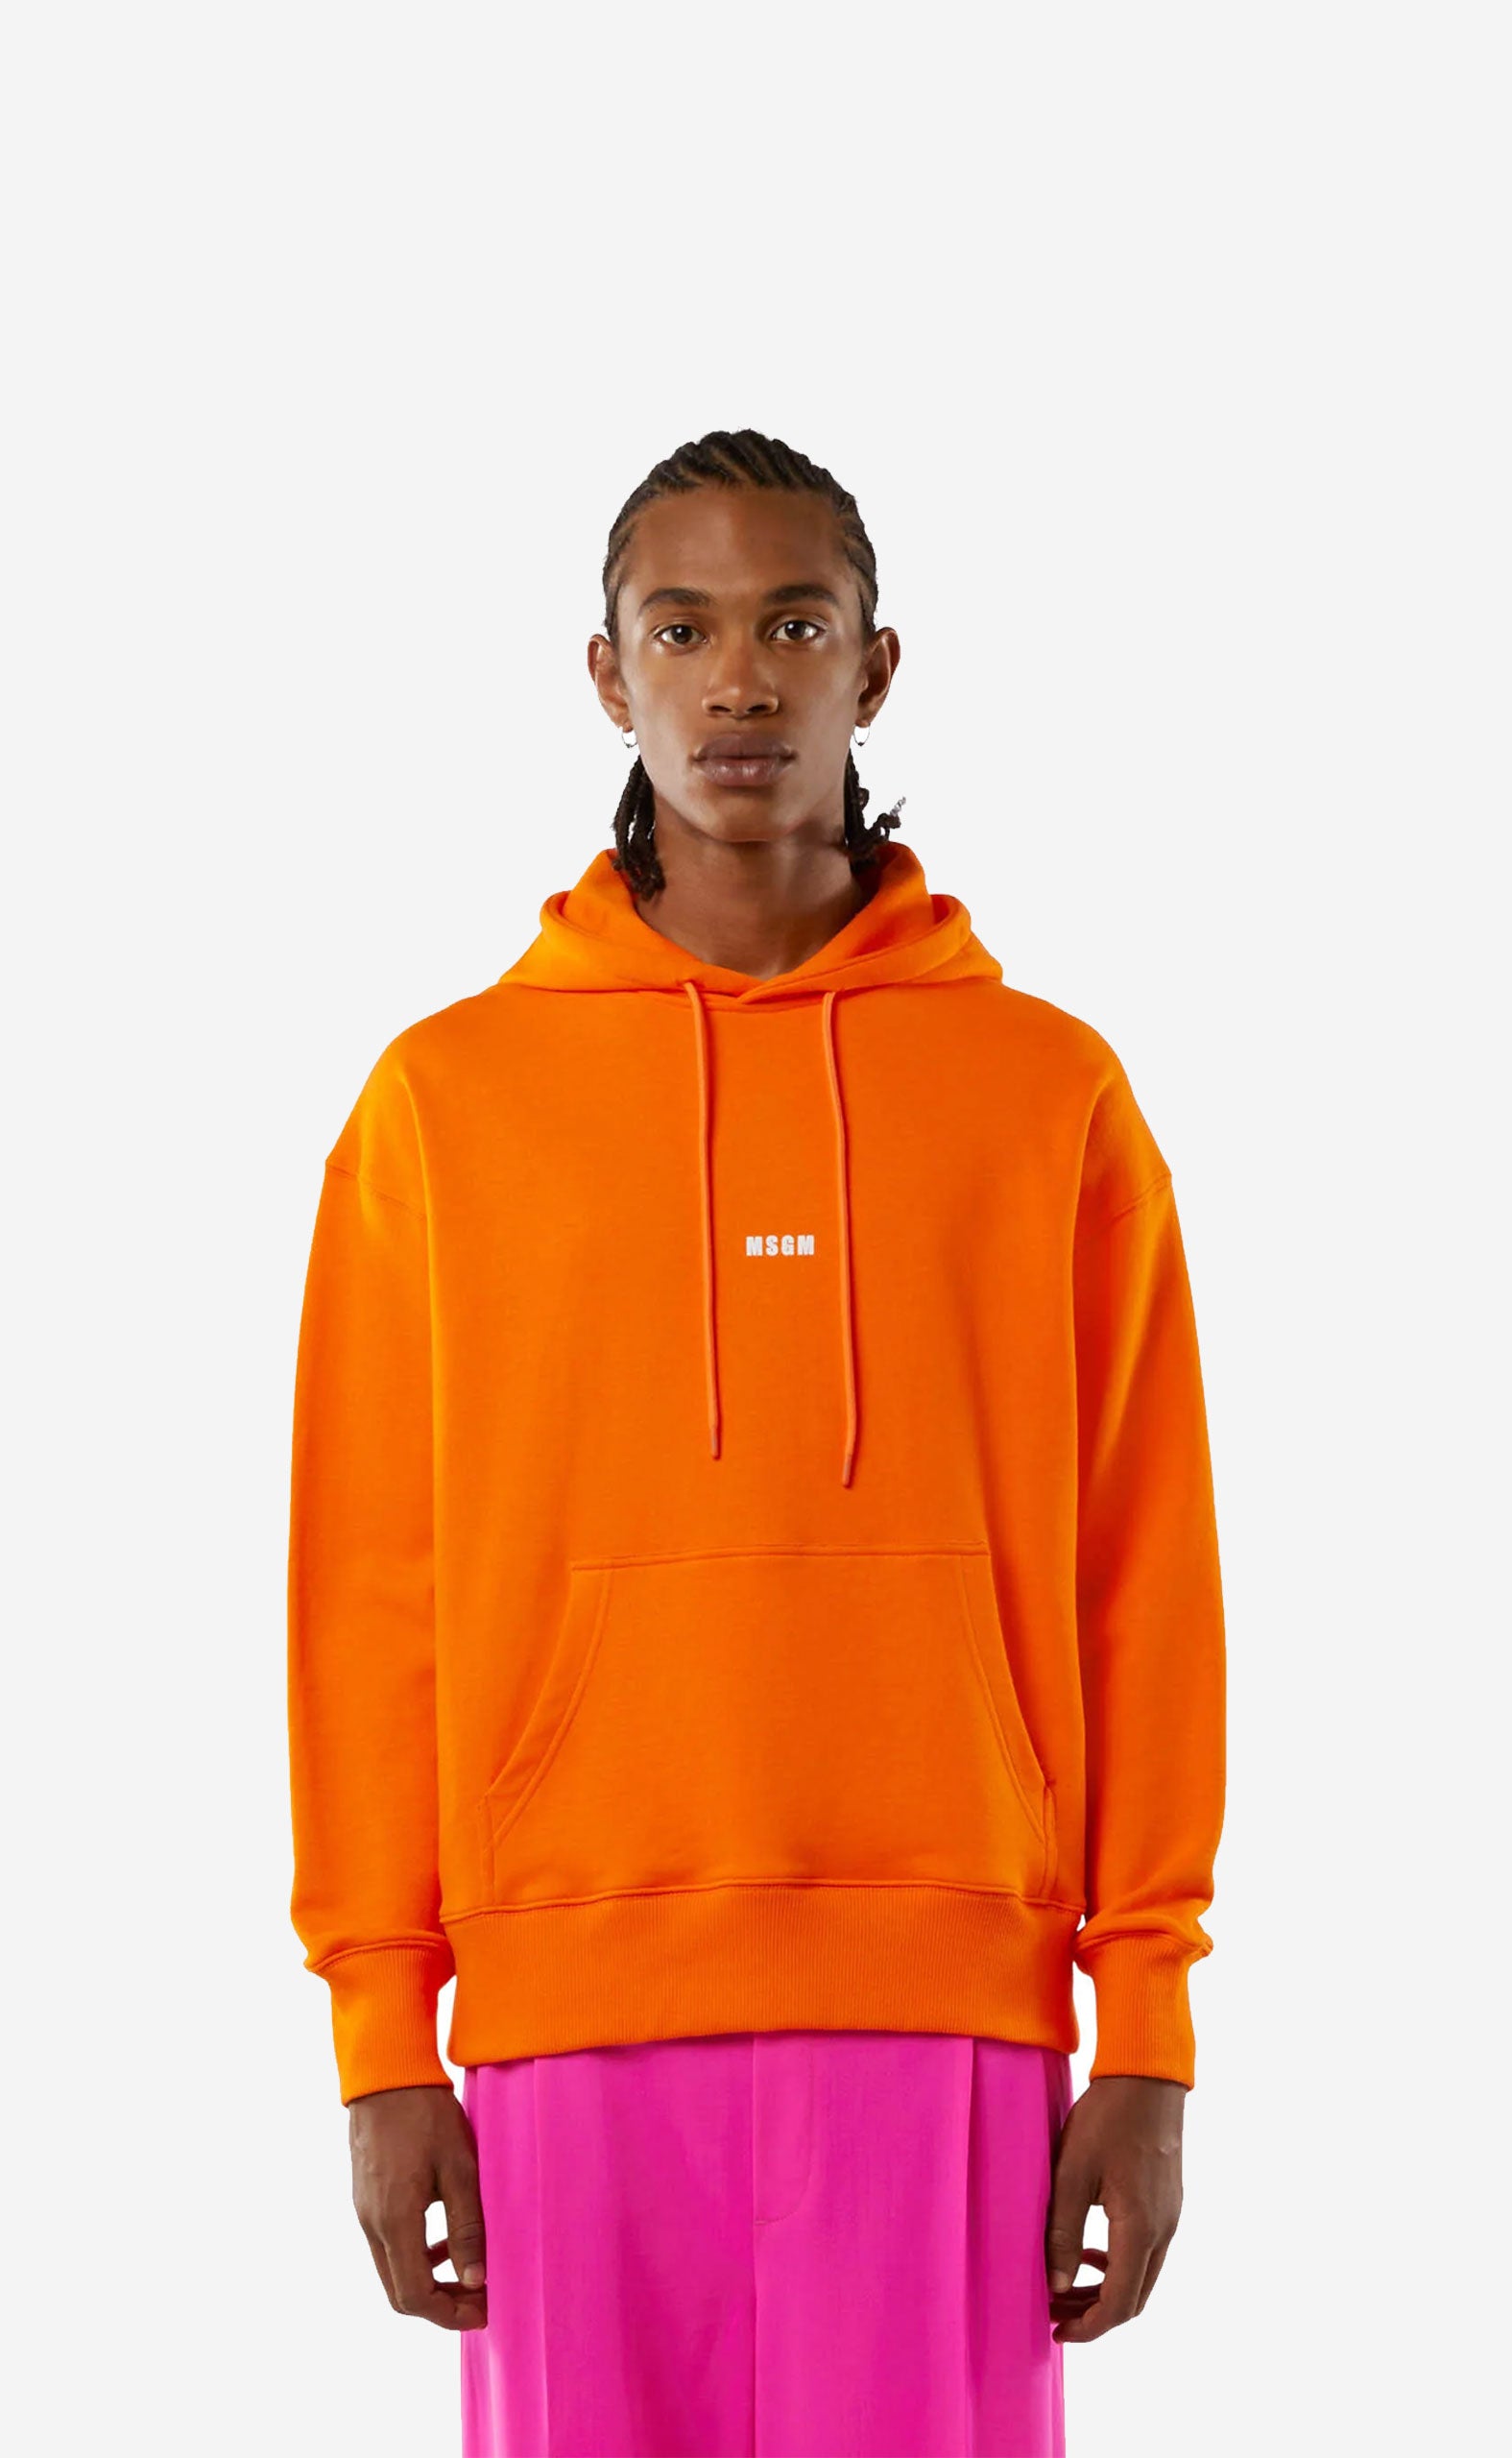 ORANGE SOLID COLOR COTTON HOODED SWEATSHIRT WITH SMALL MSGM LOGO